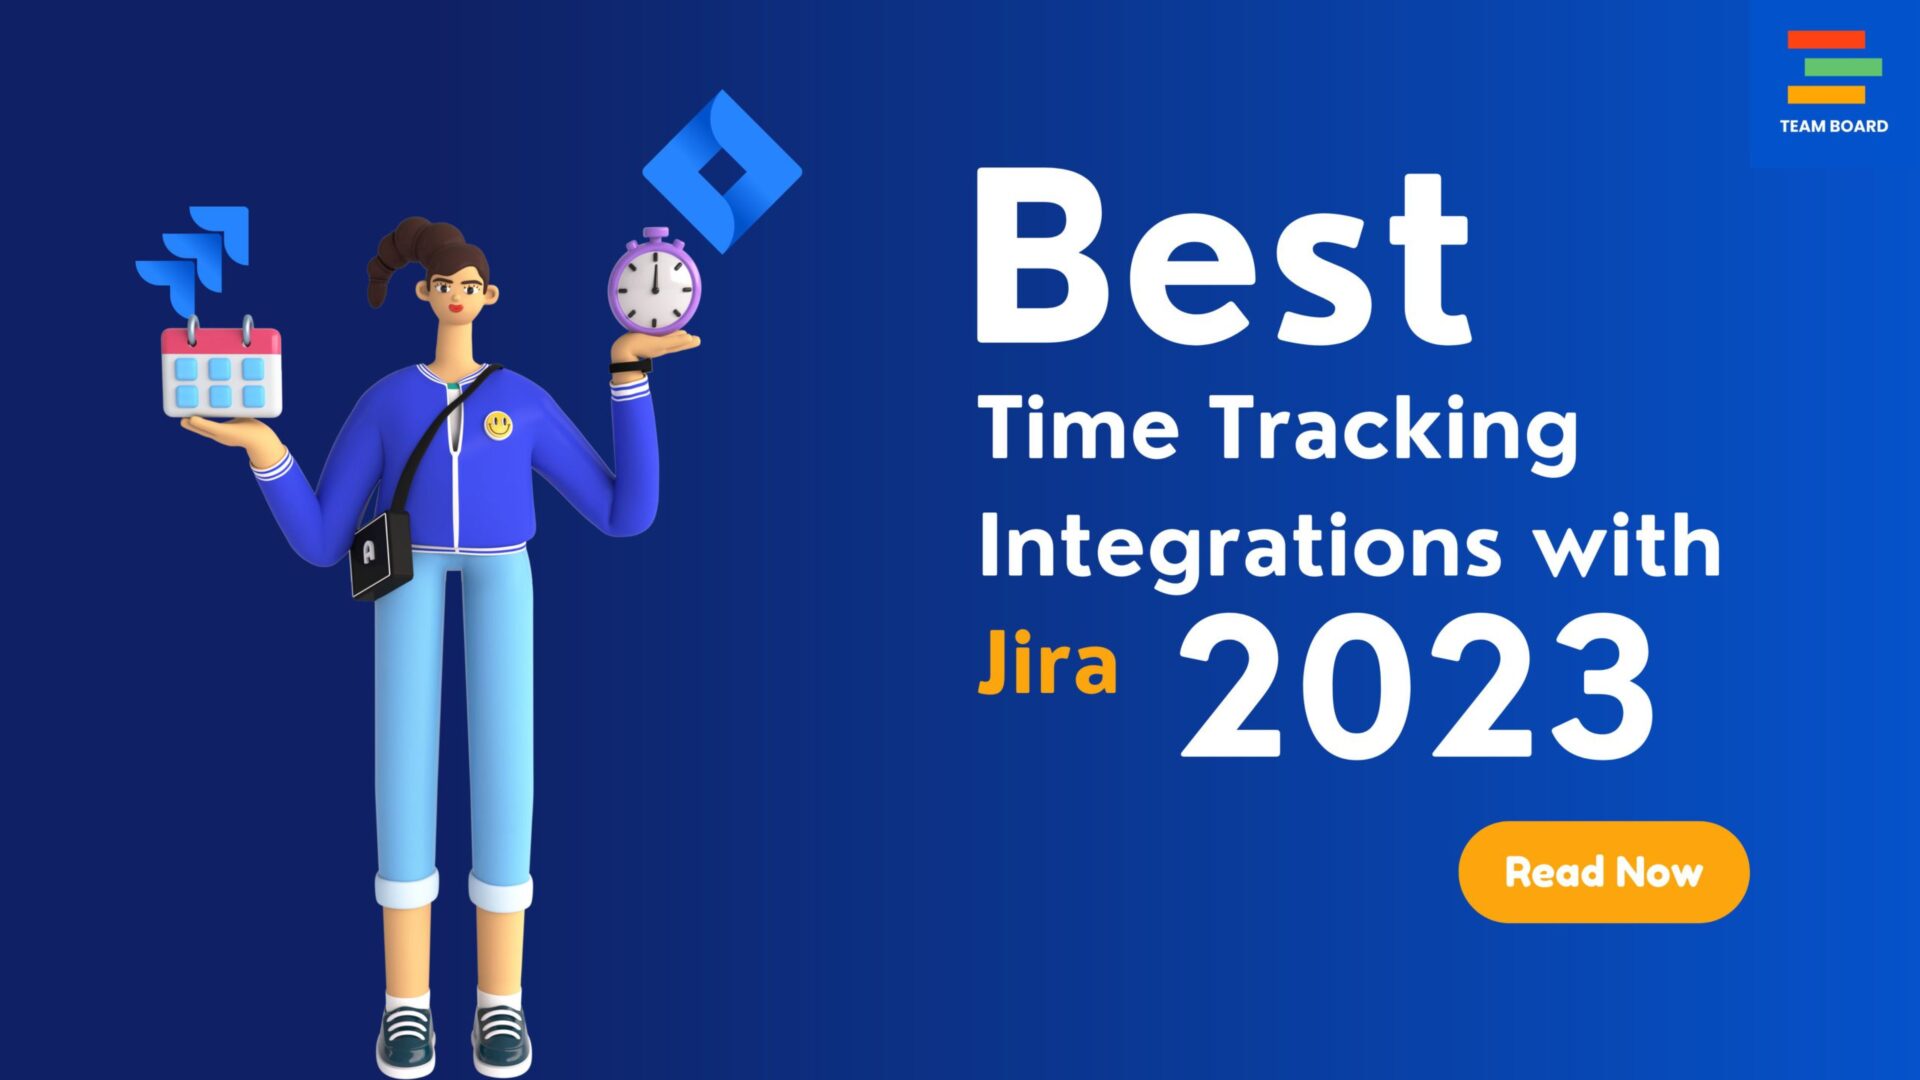 Best Time Tracking Integrations with Jira 2023